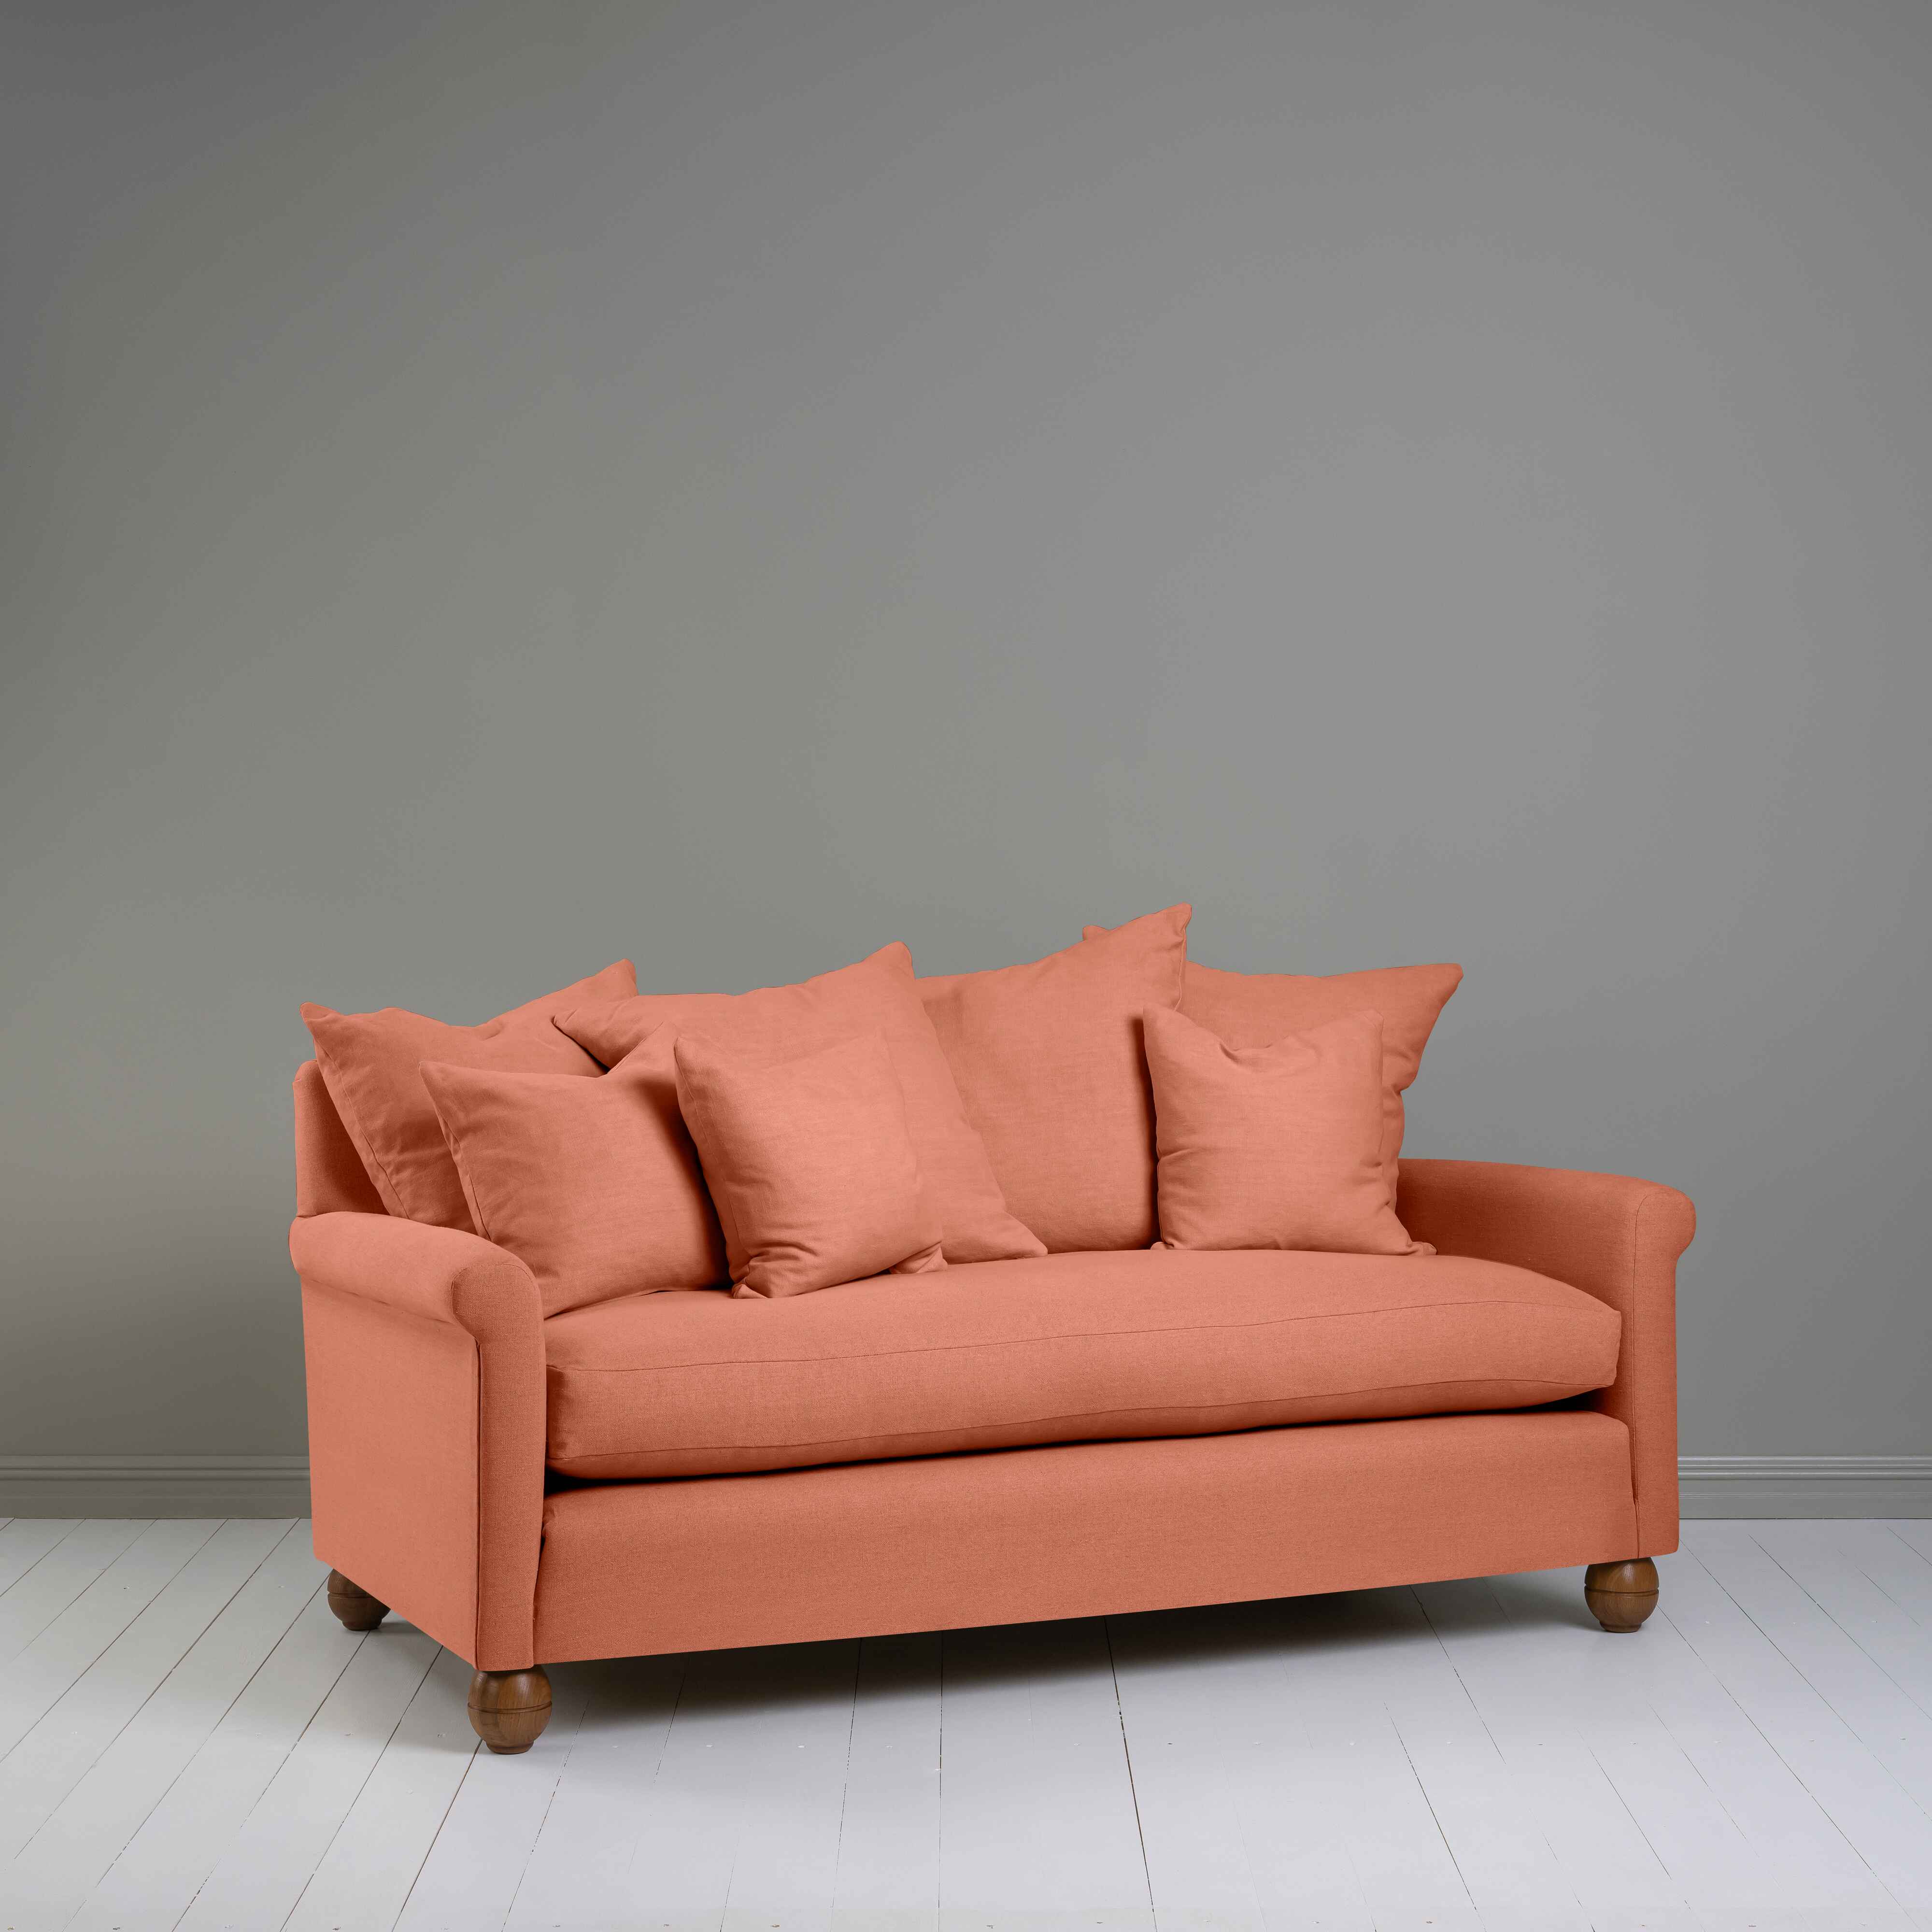  Idler 3 Seater Sofa in Laidback Linen Cayenne 